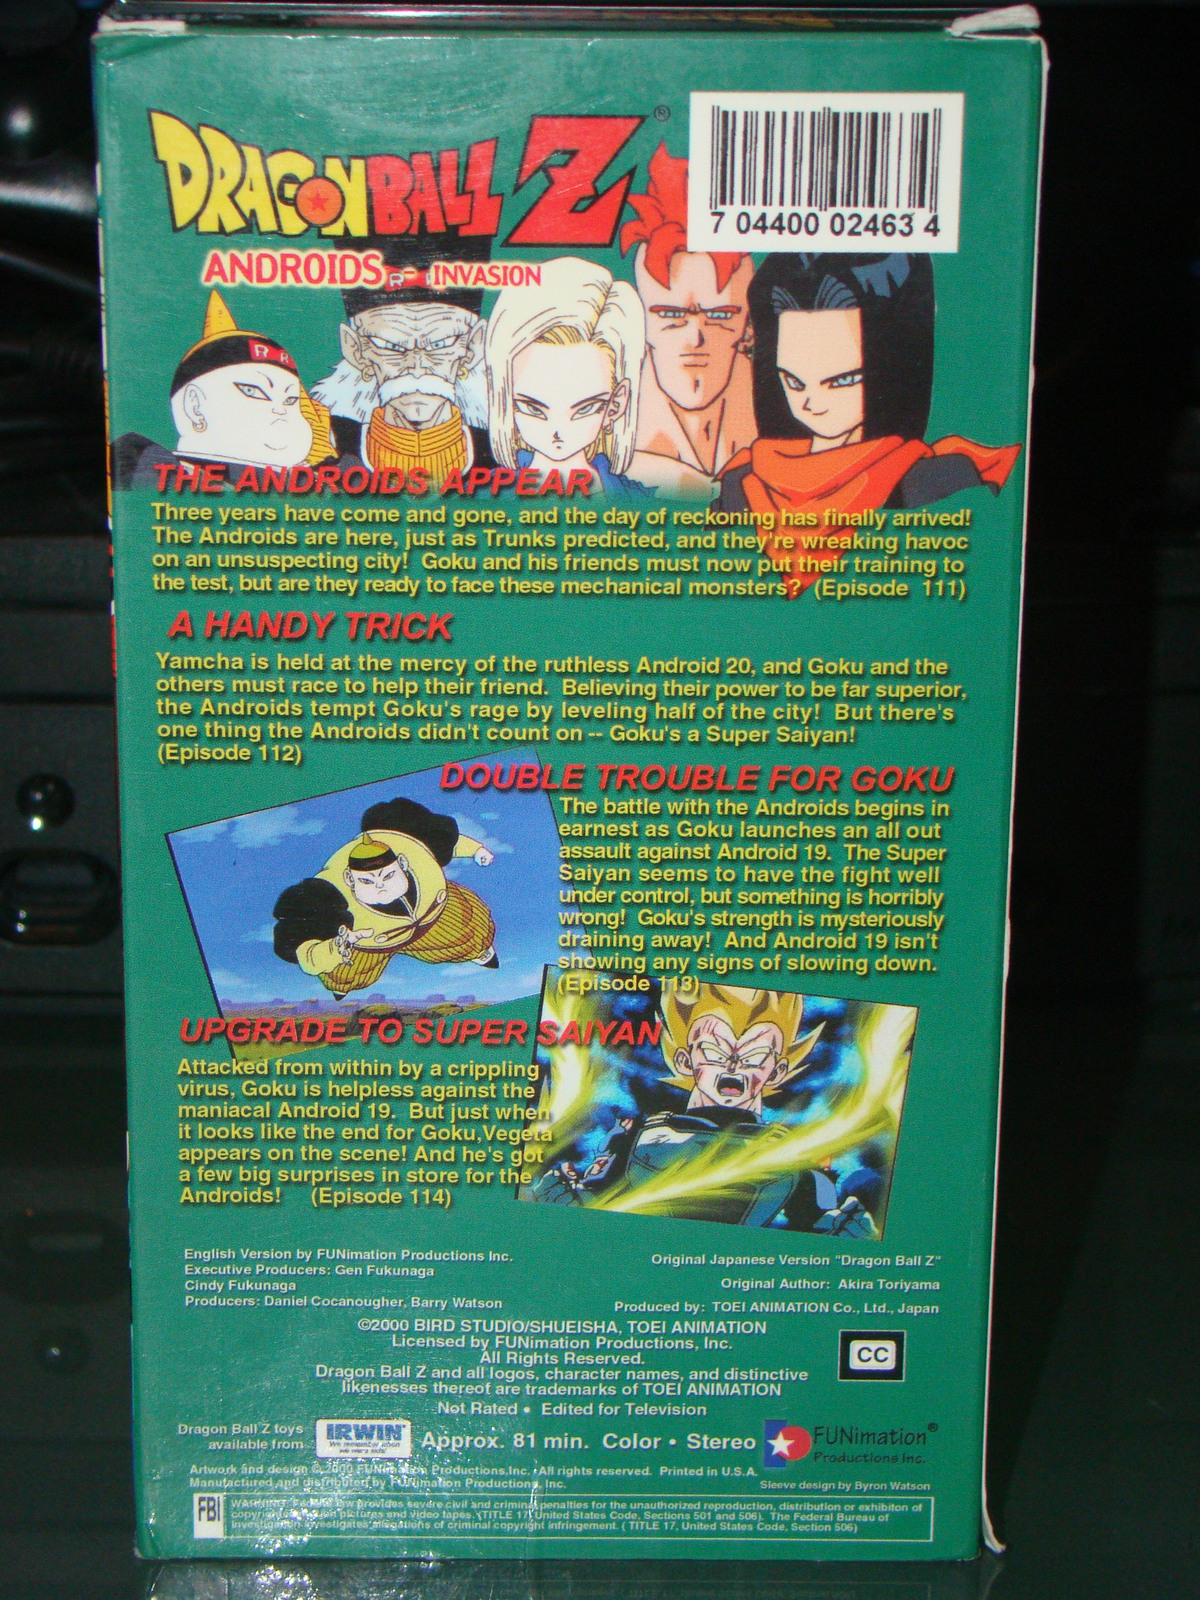 DRAGON BALL Z - ANDROIDS INVASION (VHS) - VHS Tapes